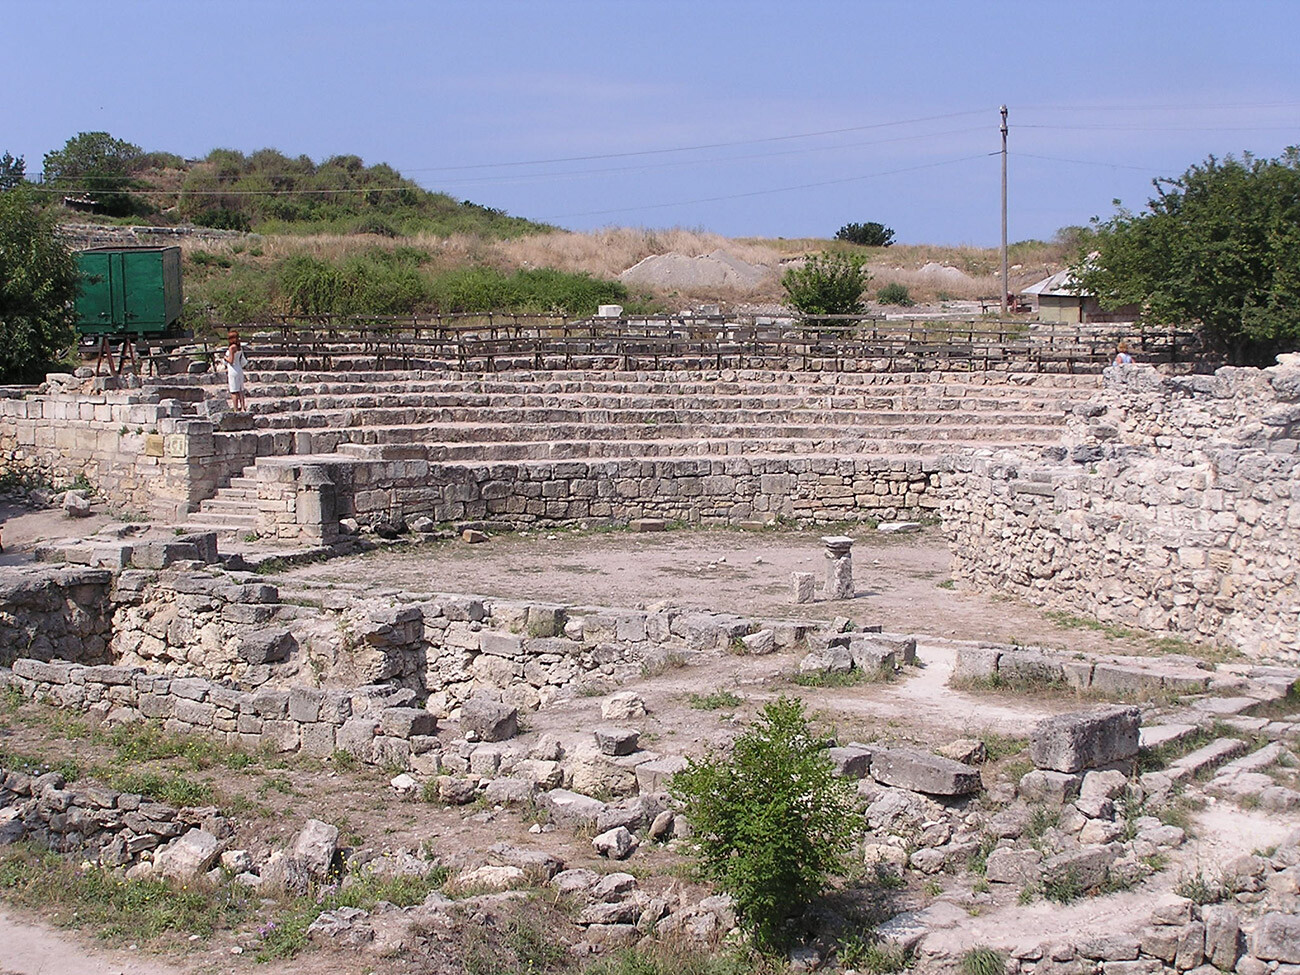 The ancient theater of Chersonesus